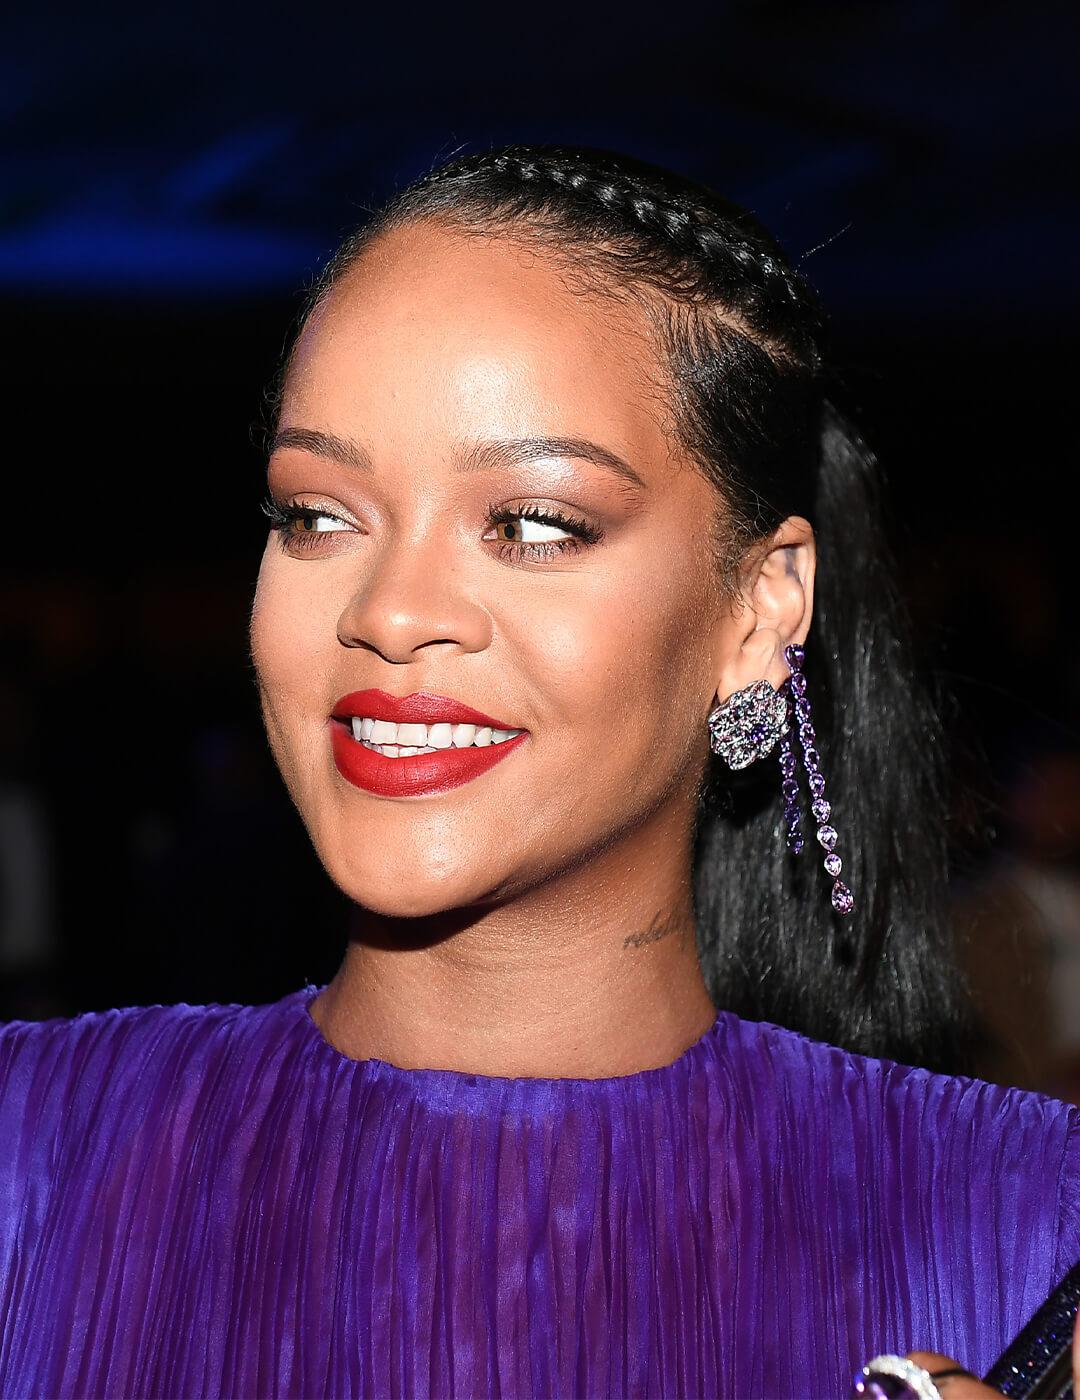 Rihanna looking glam in a purple dress and braided hairstyle